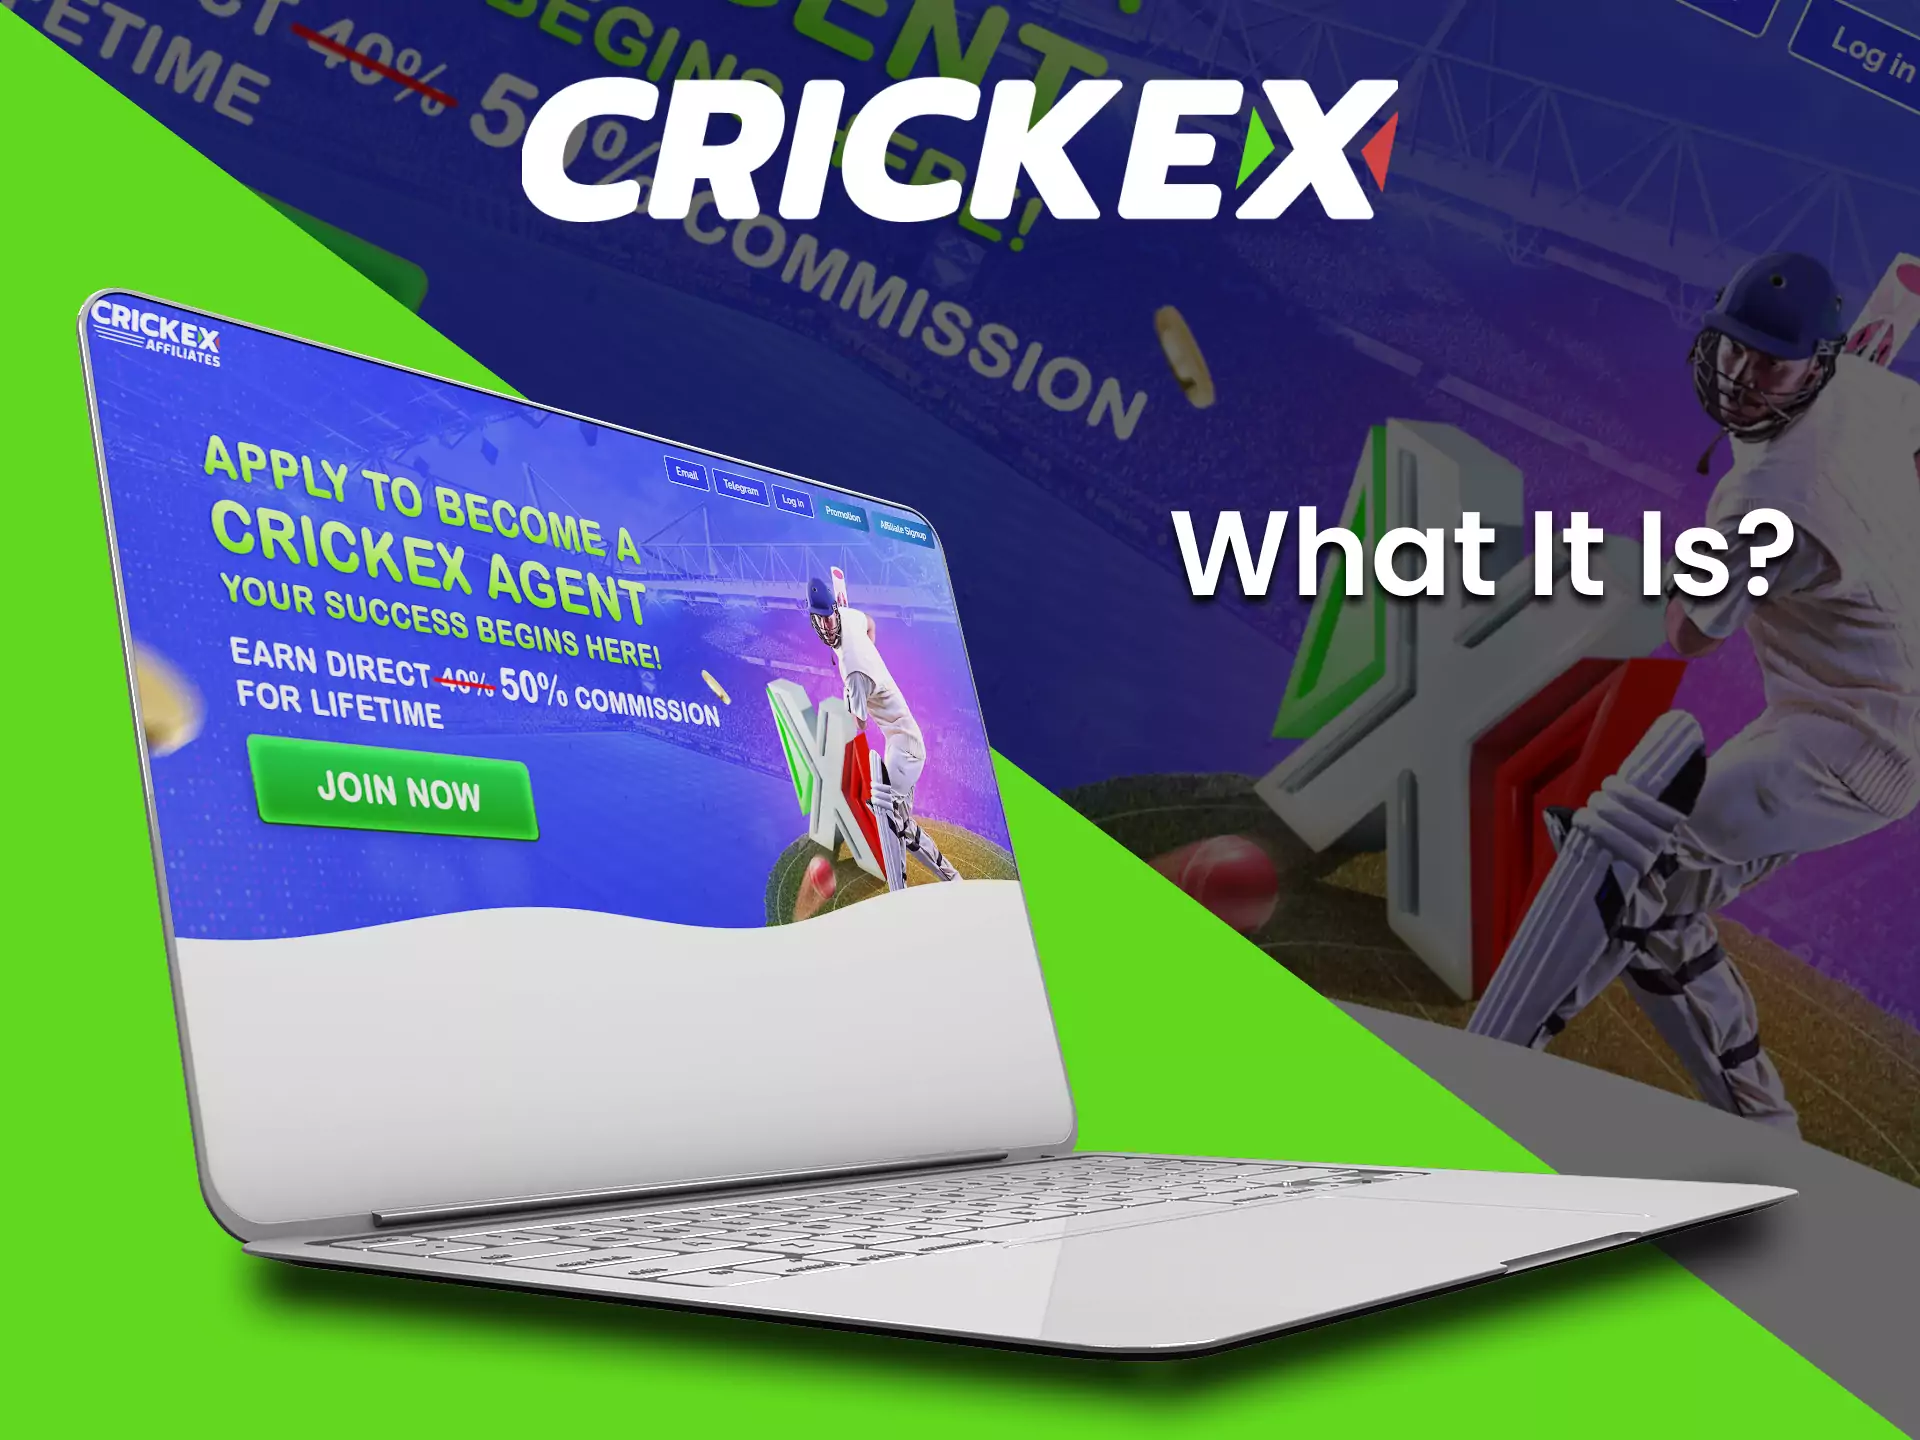 The affiliate program by Crickex allows for earning more money.